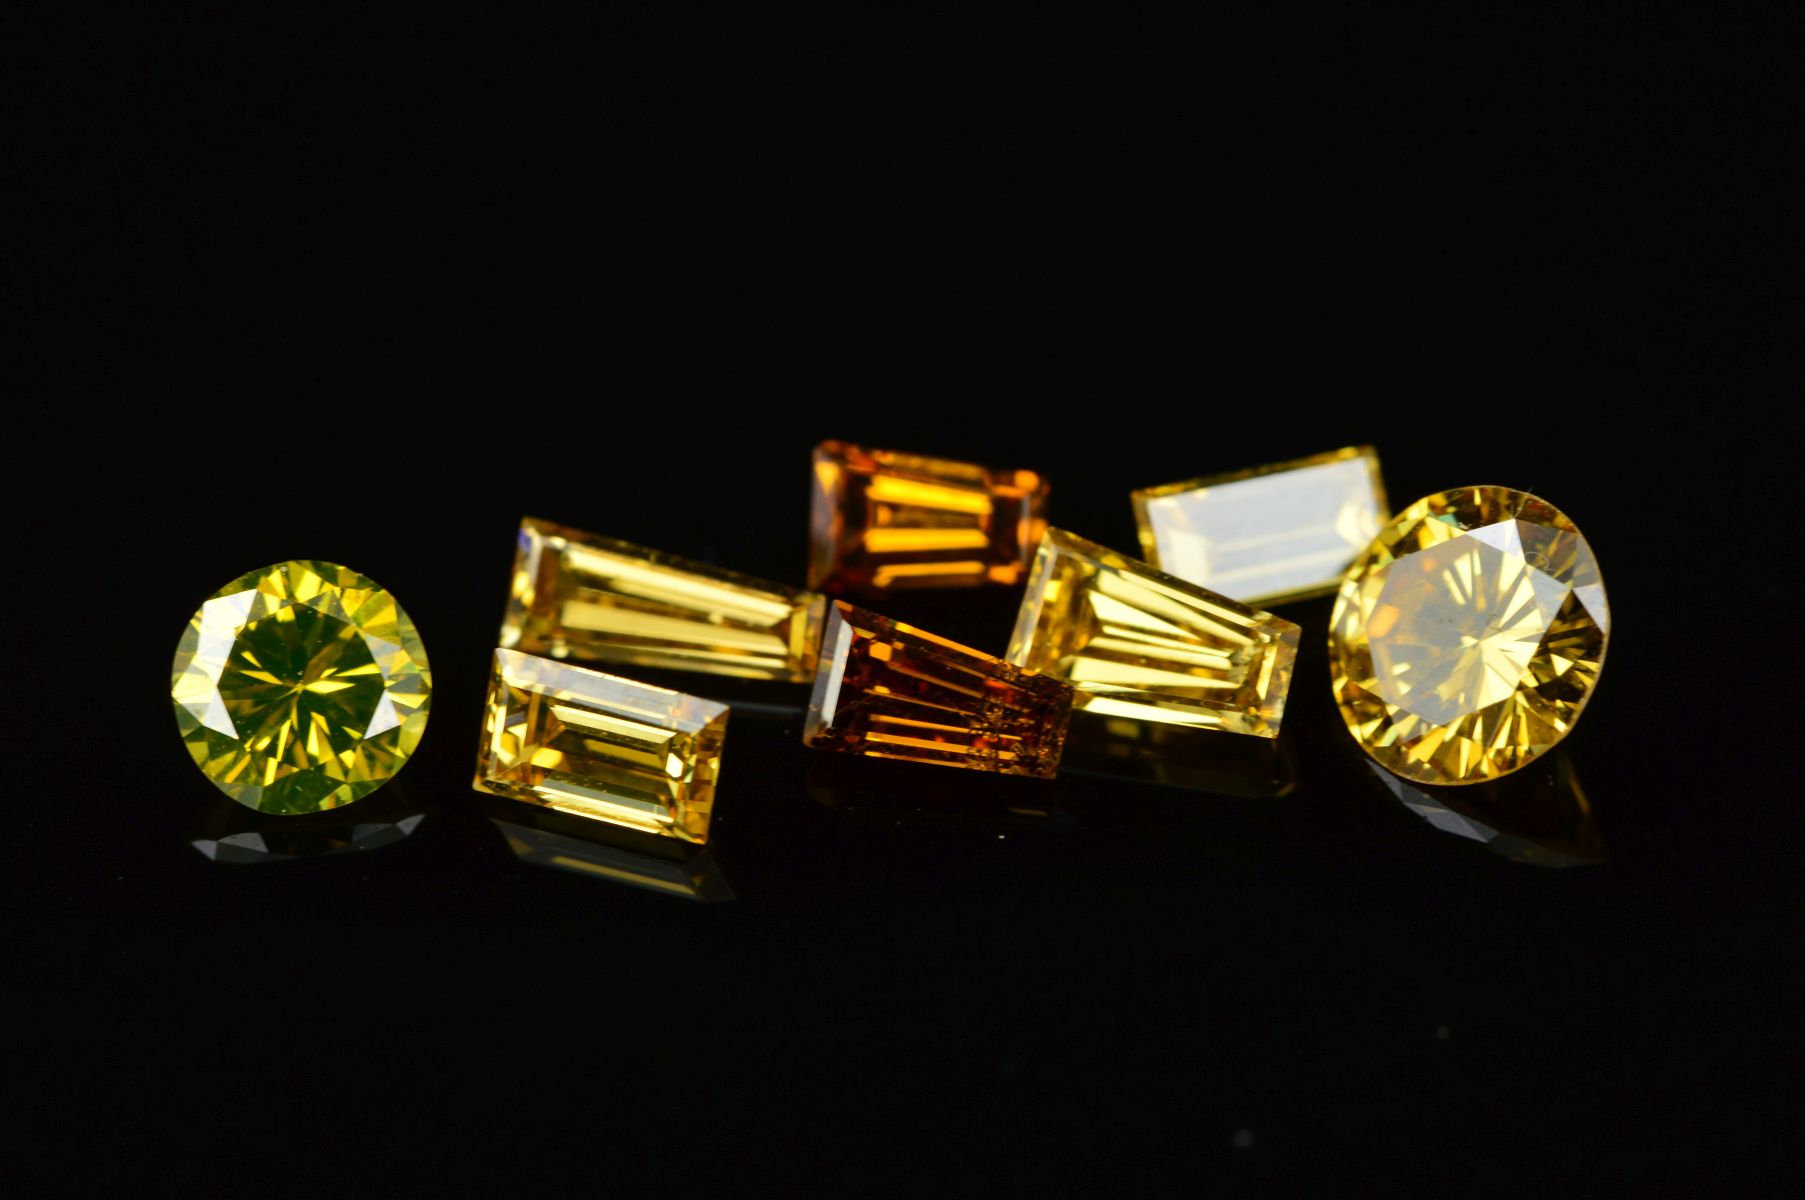 A SELECTION OF VARI-CUT MIXED COLOURED DIAMONDS, yellow to brown shades, approximate total weight